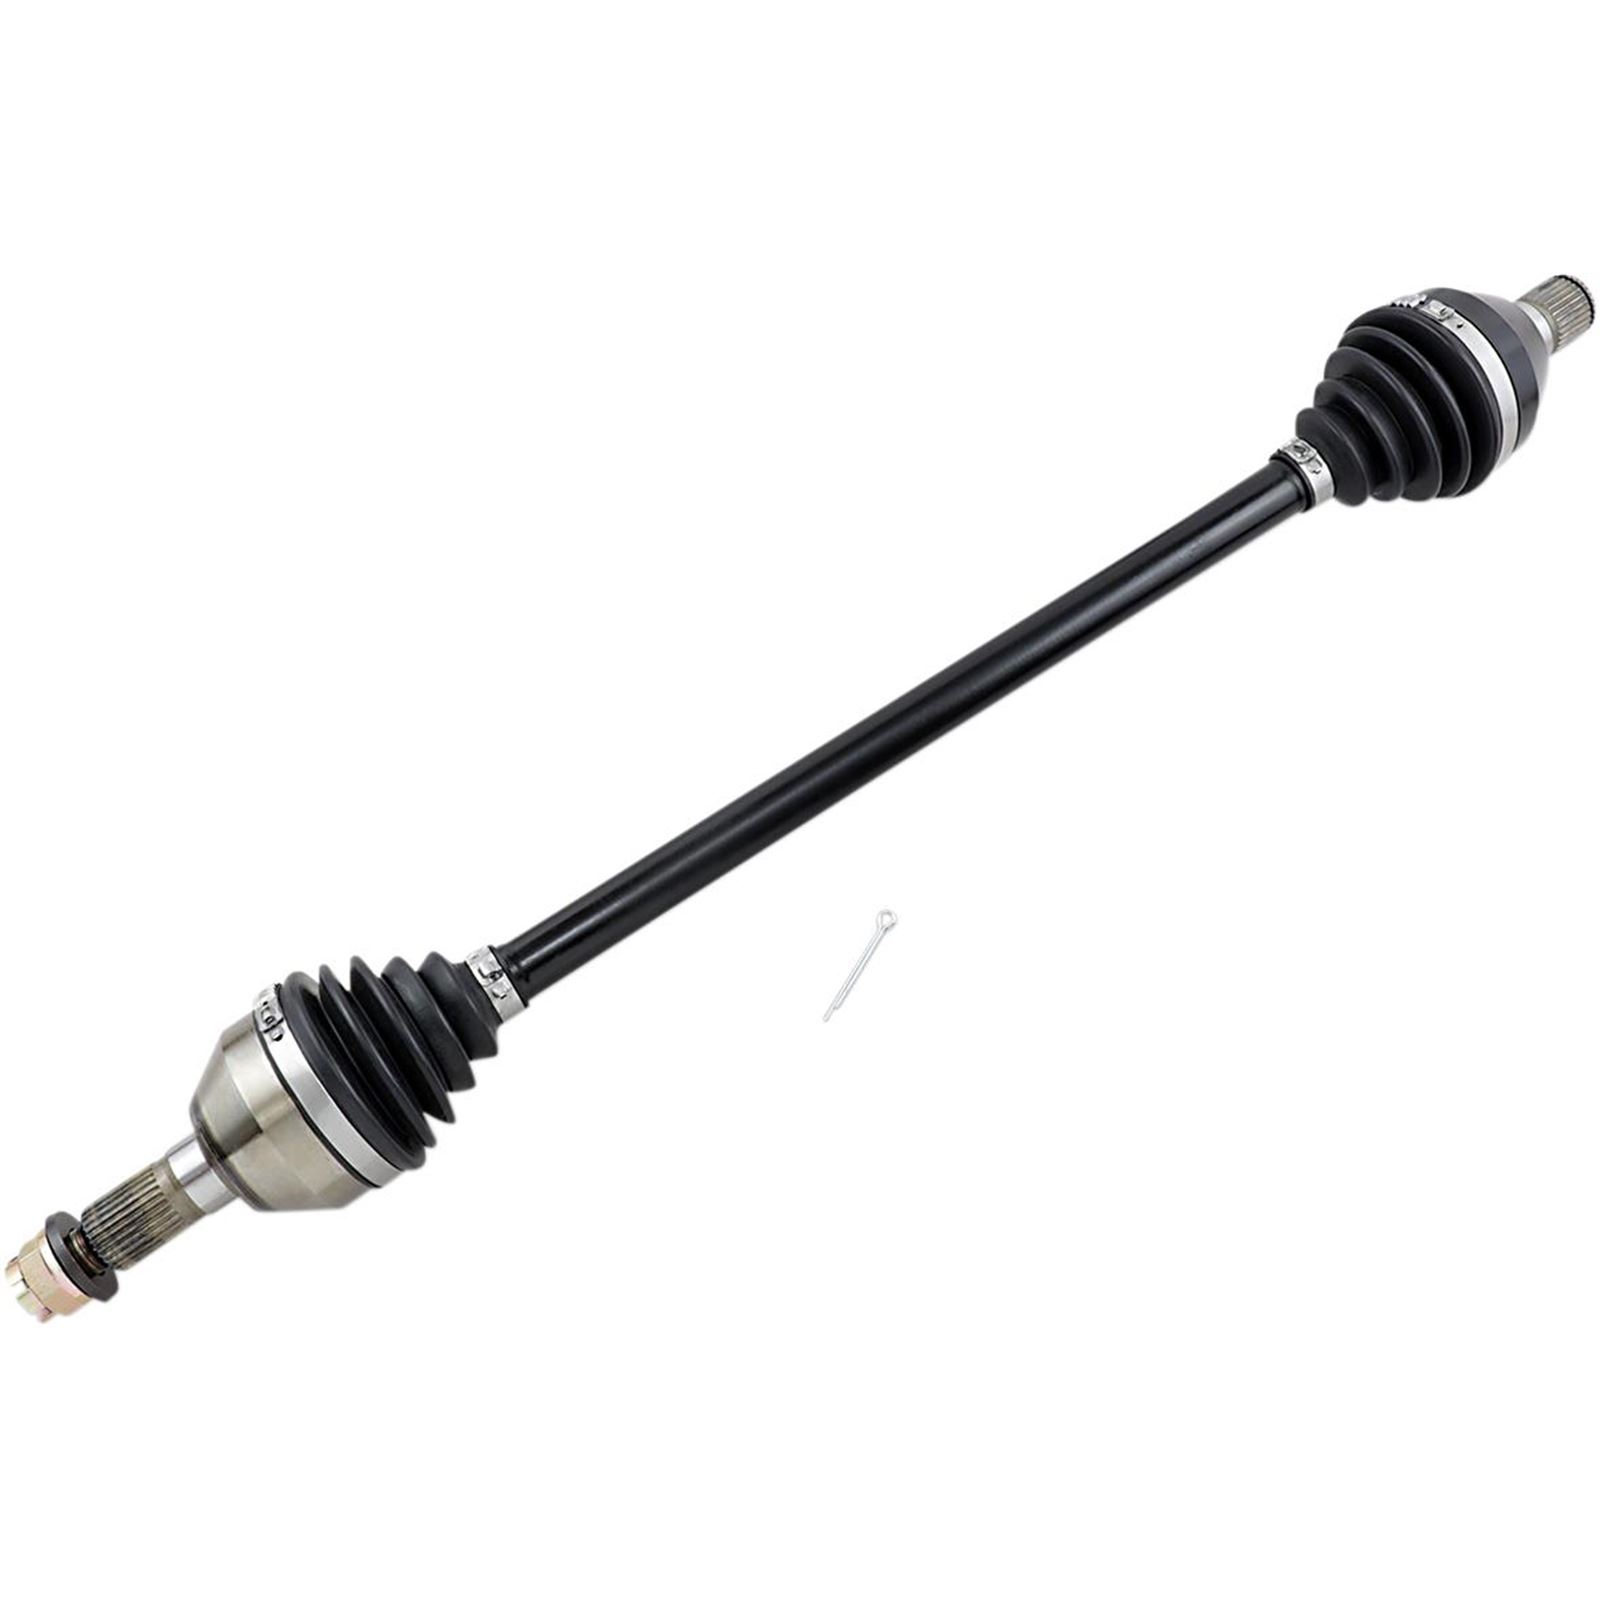 Moose Racing Complete Axle - Heavy Duty Kit for Can-Am